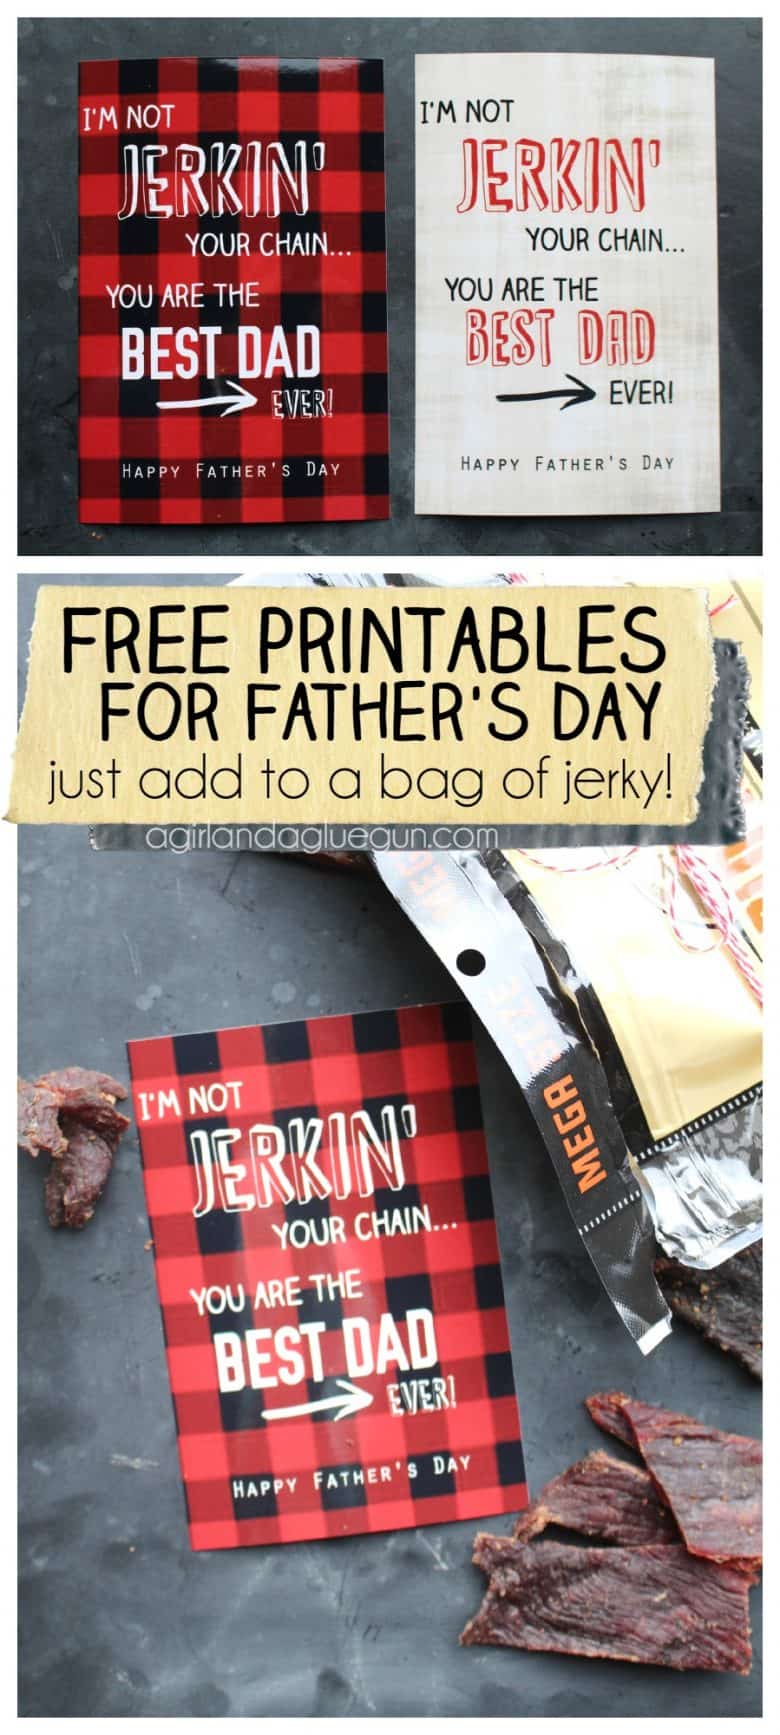 Father's day printables free